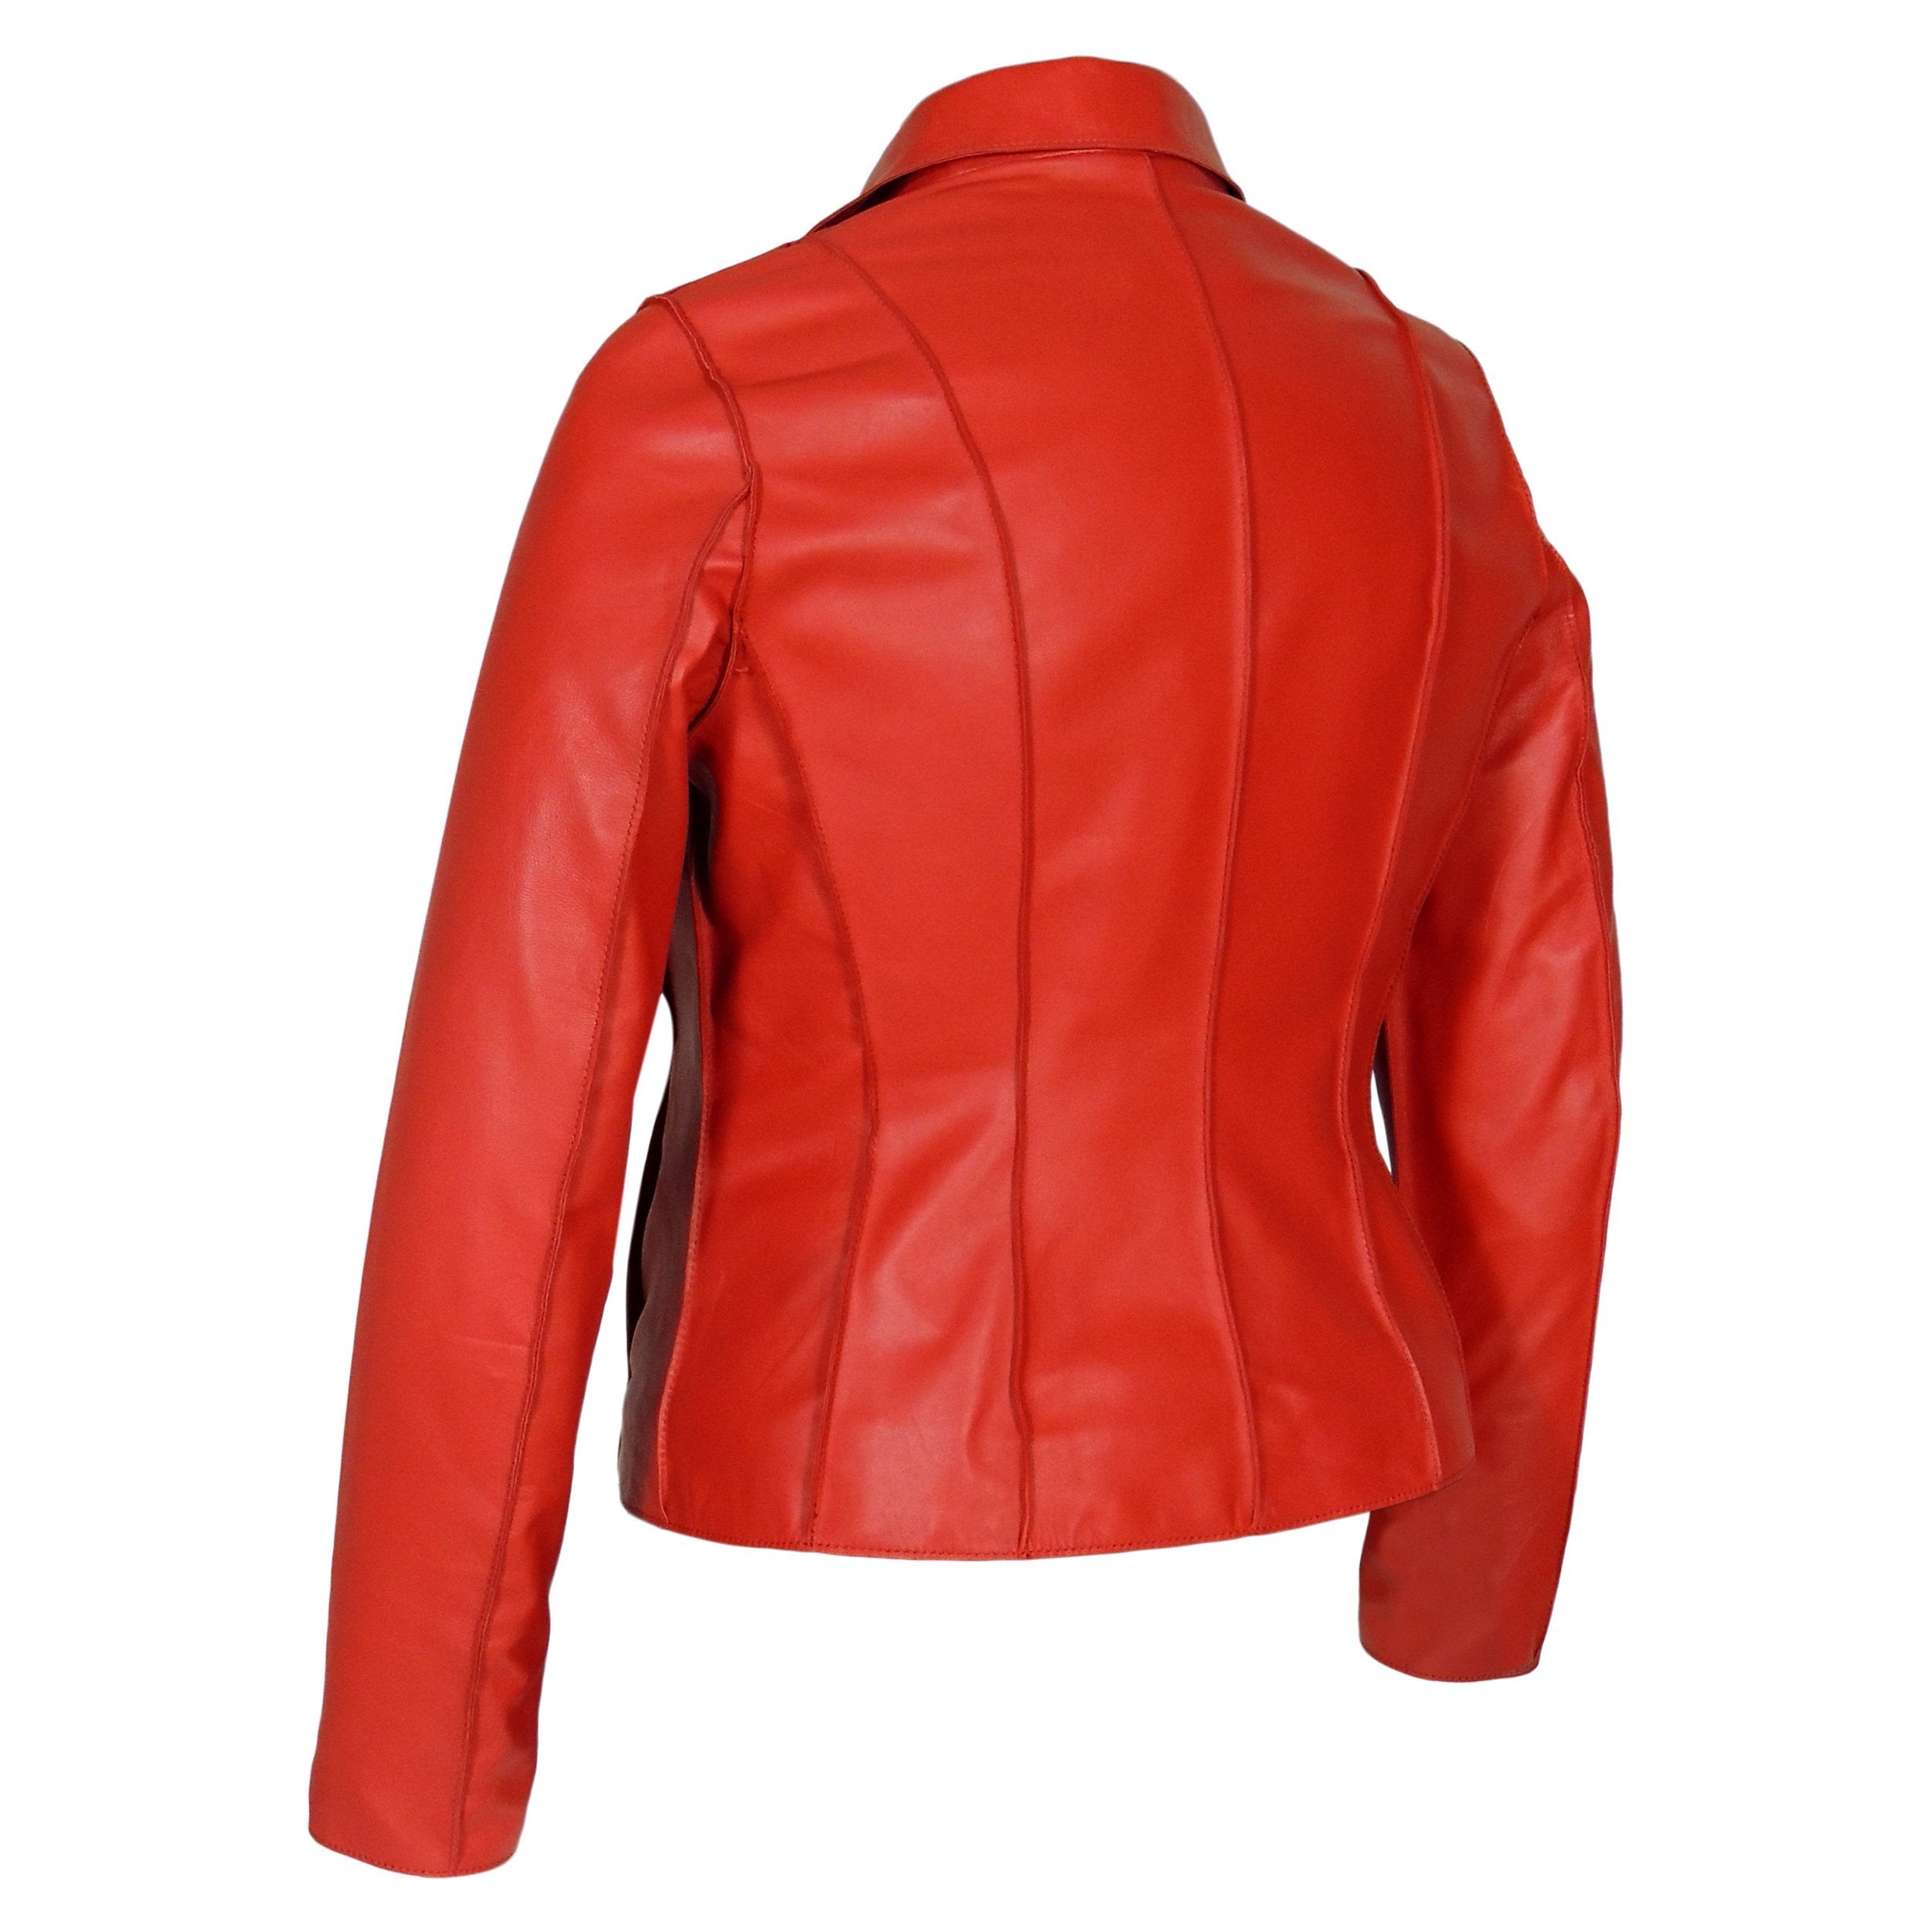 Picture of a Women's Professional Stunner Sheepskin Leather Jacket back side view